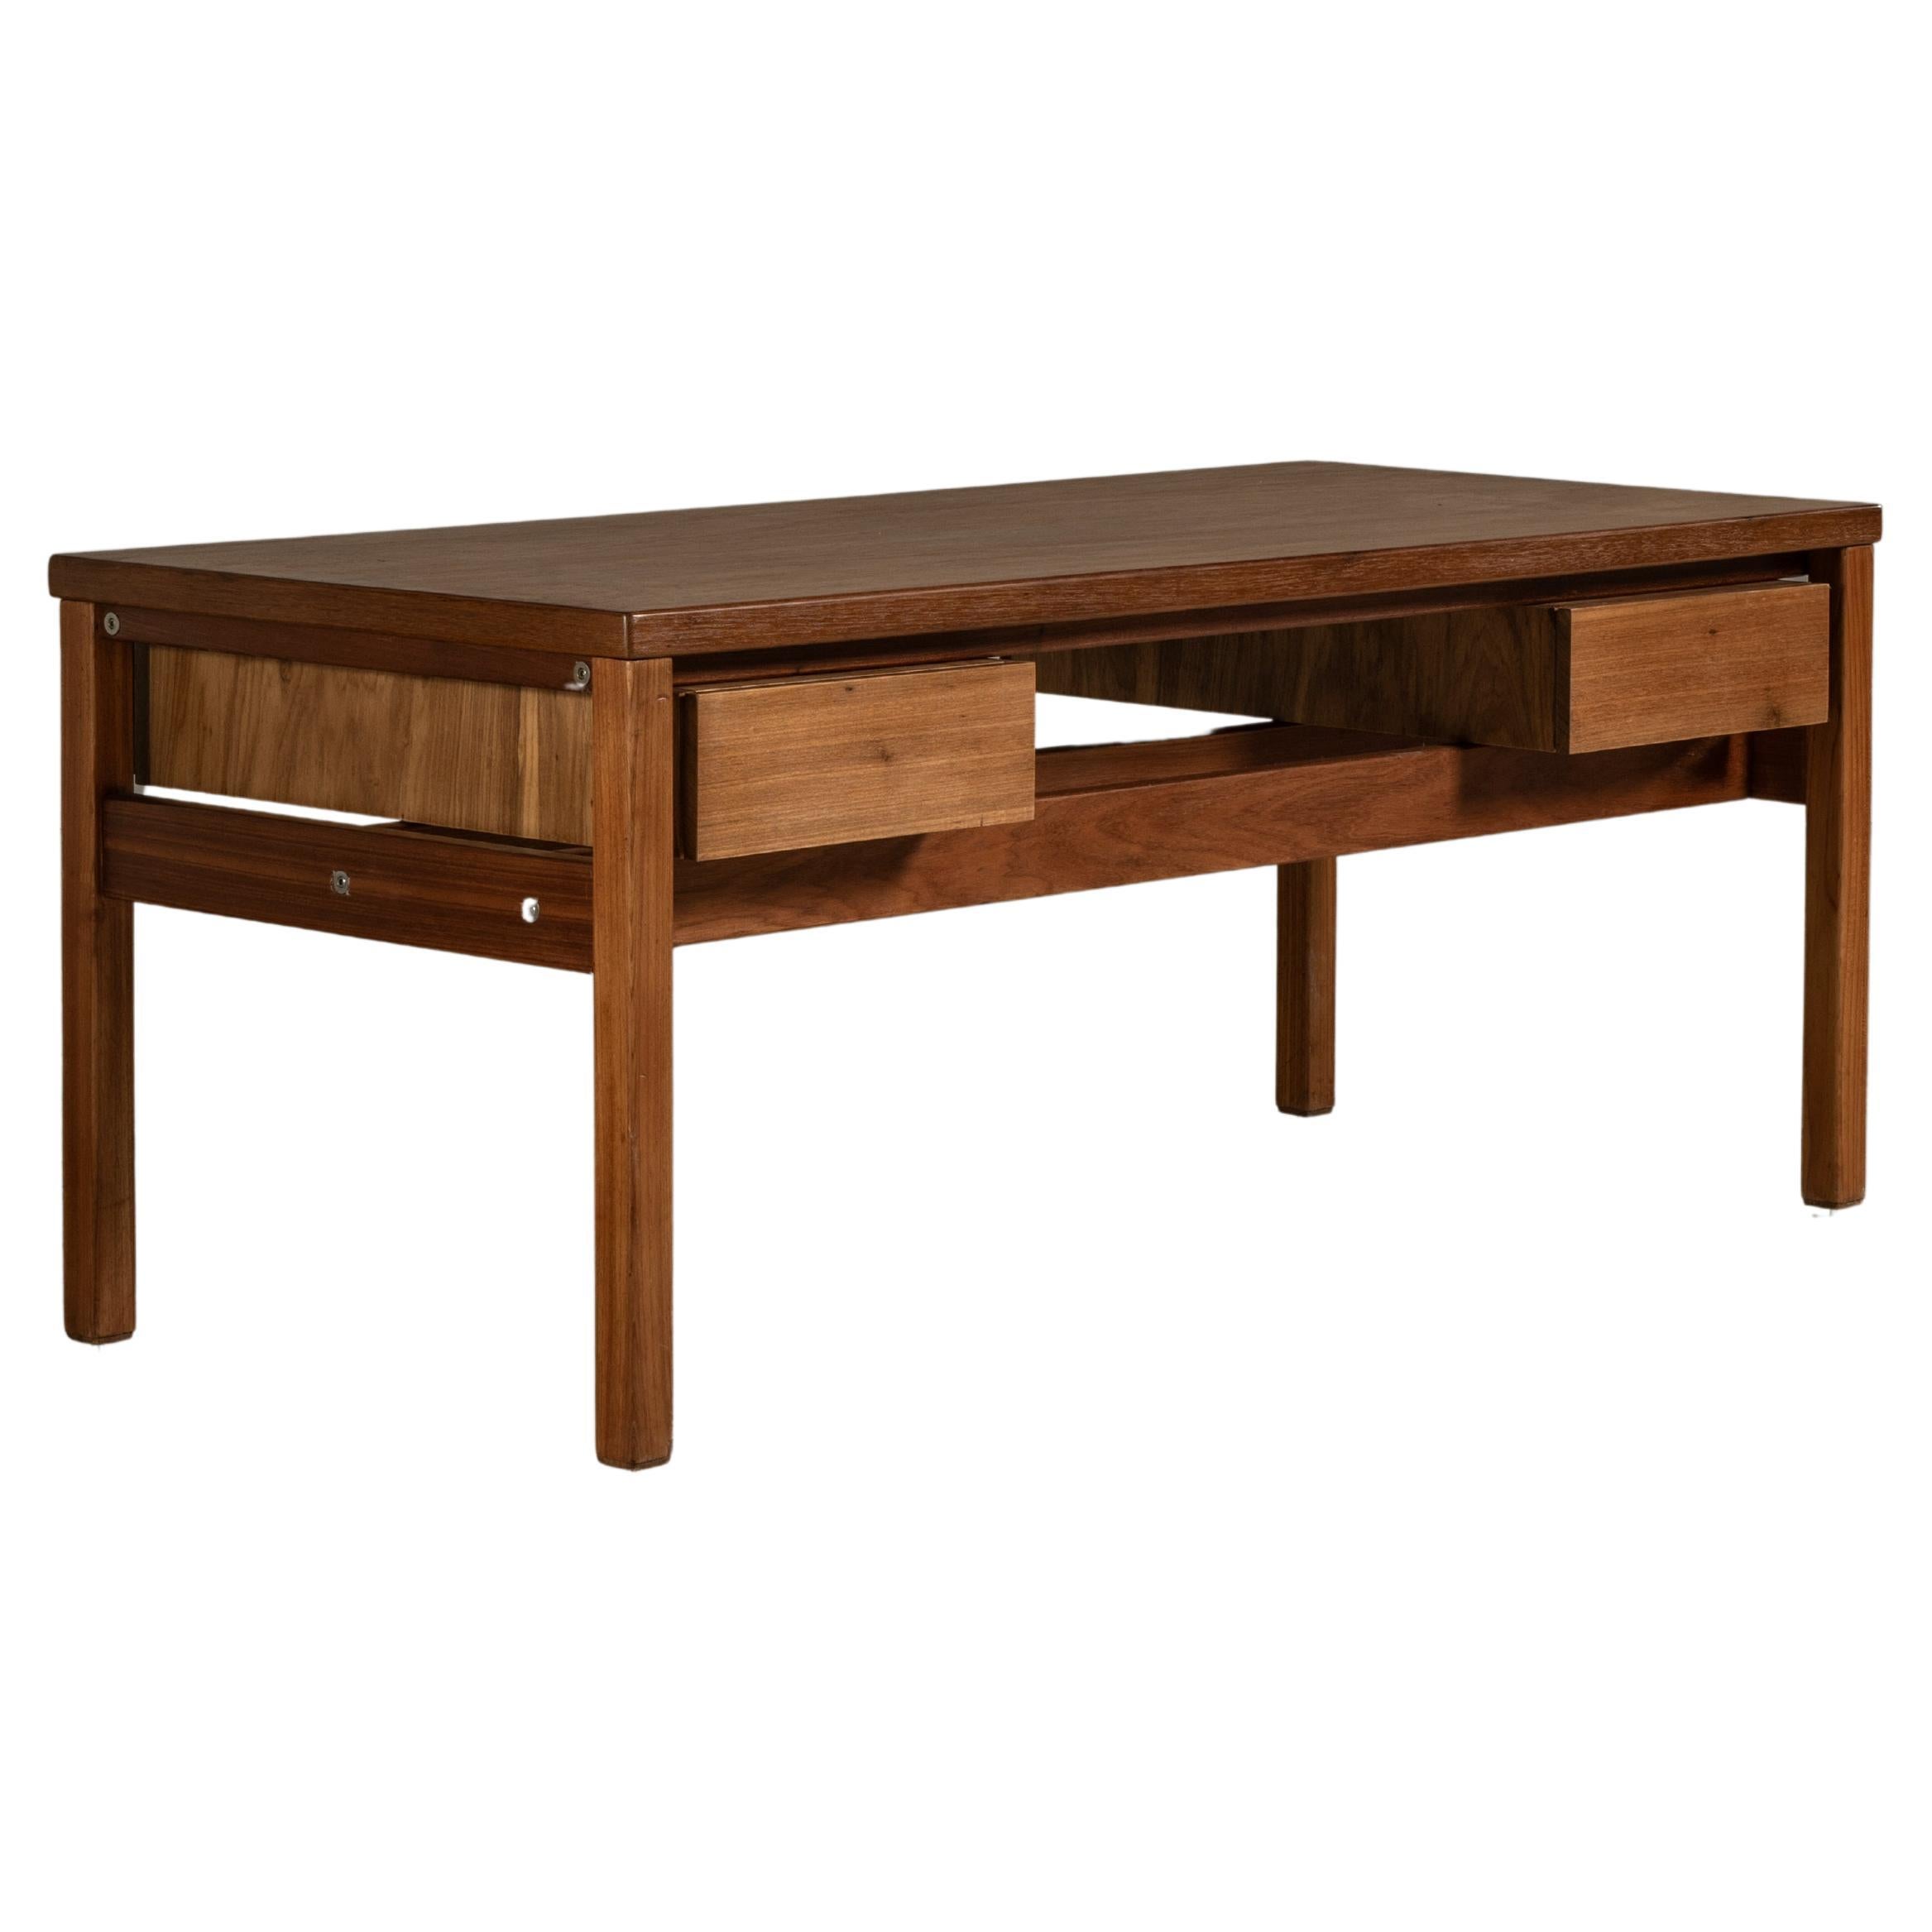 Desk in Solid Hardwood, by Sergio Rodrigues, Brazilian Mid-Century Modern   For Sale